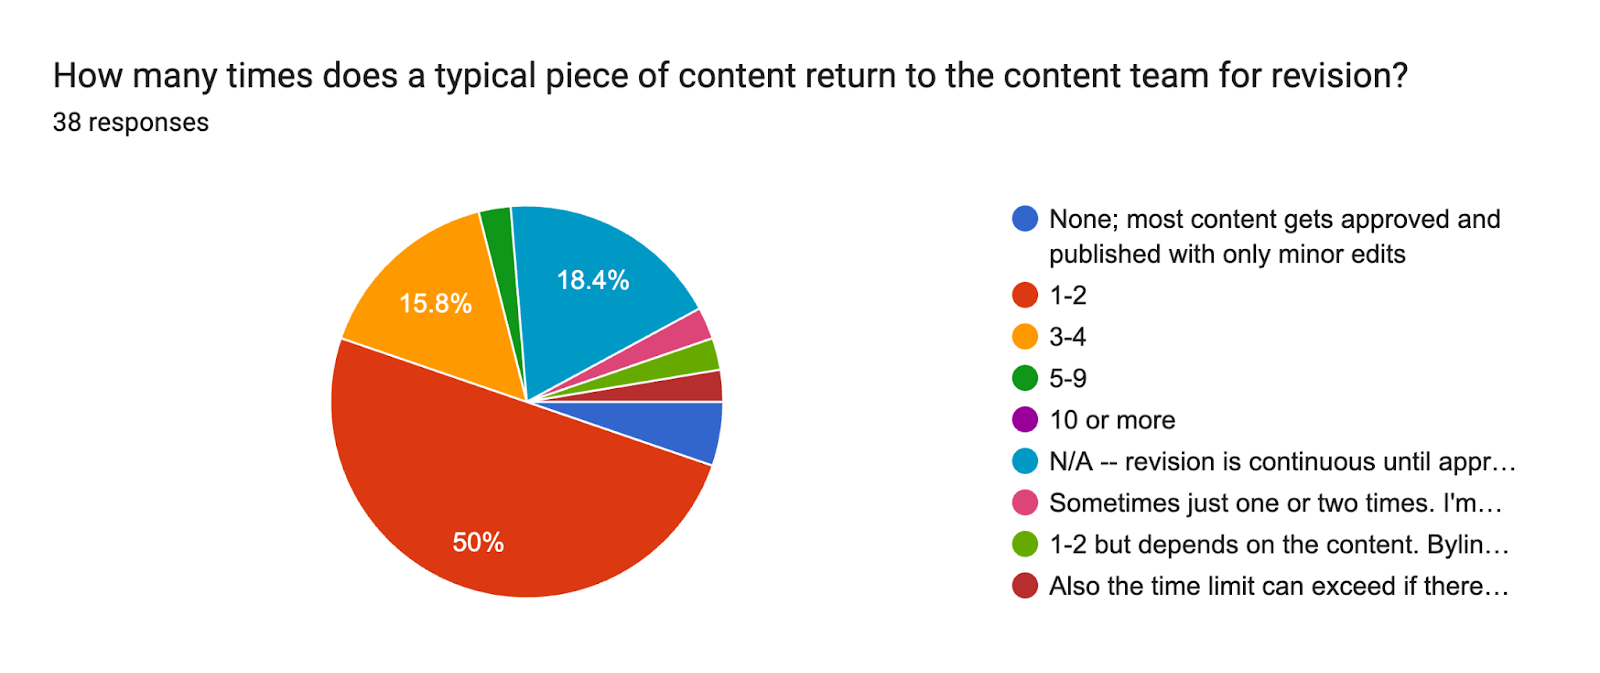 Forms response chart. Question title: How many times does a typical piece of content return to the content team for revision? . Number of responses: 38 responses.